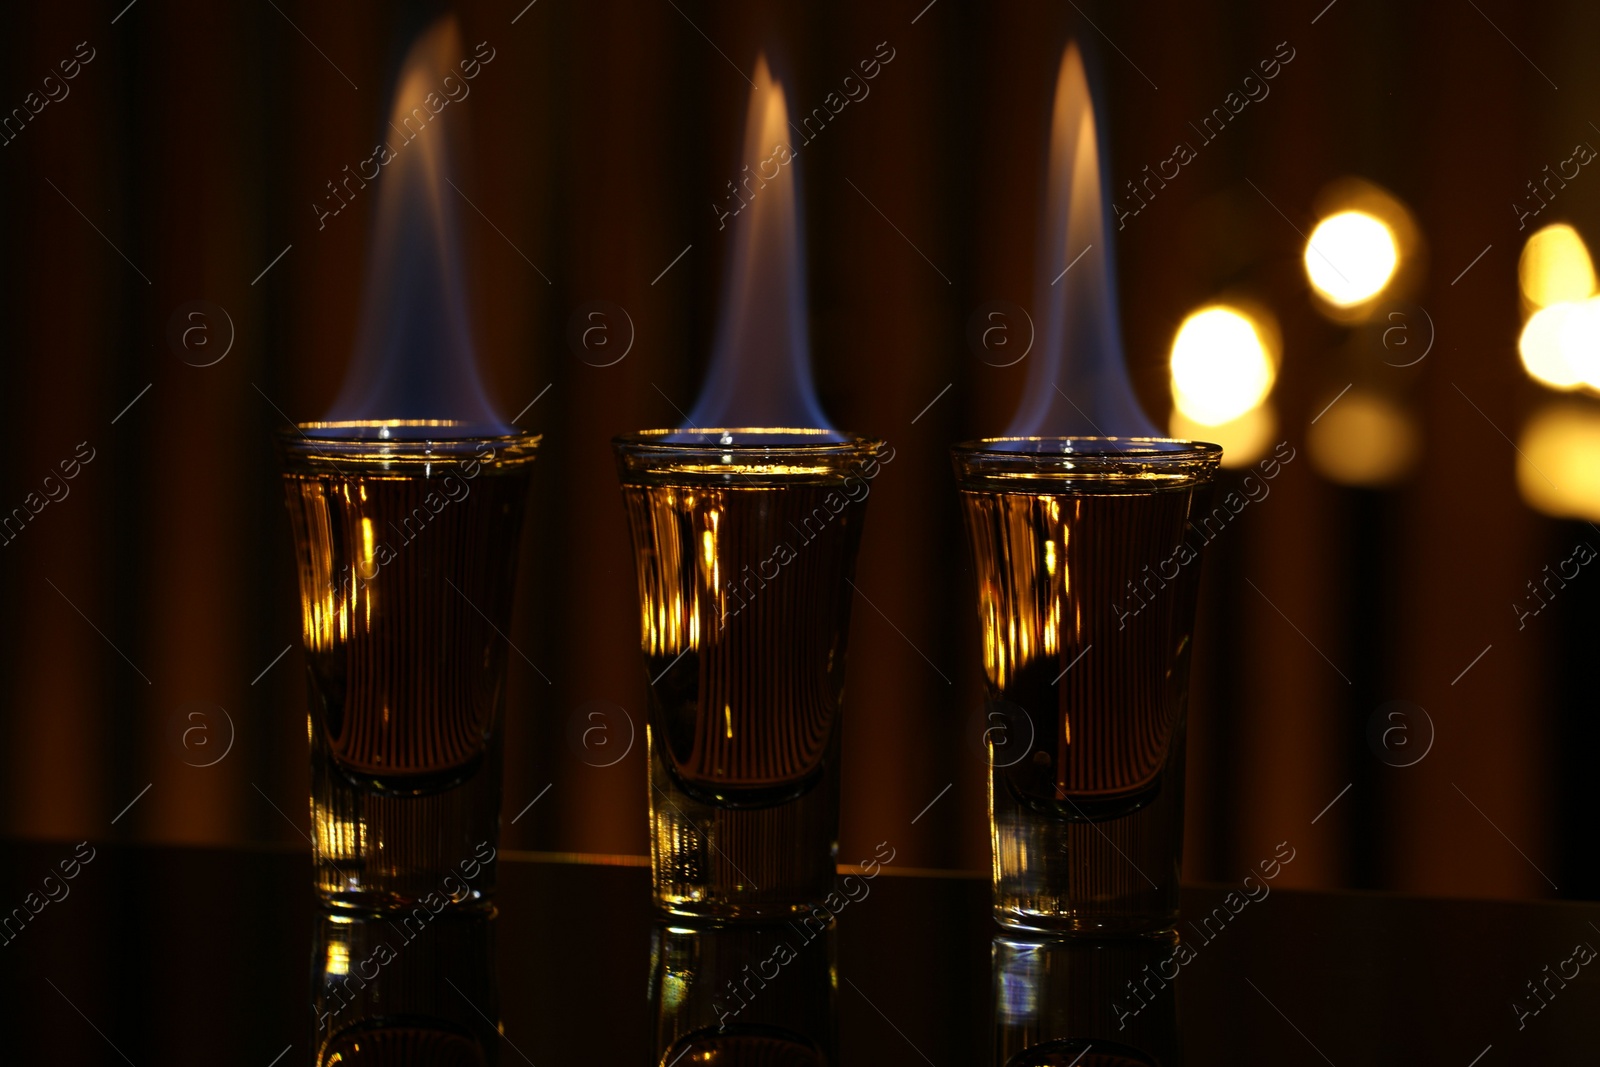 Photo of Flaming alcohol drink in shot glasses on mirror surface against blurred background